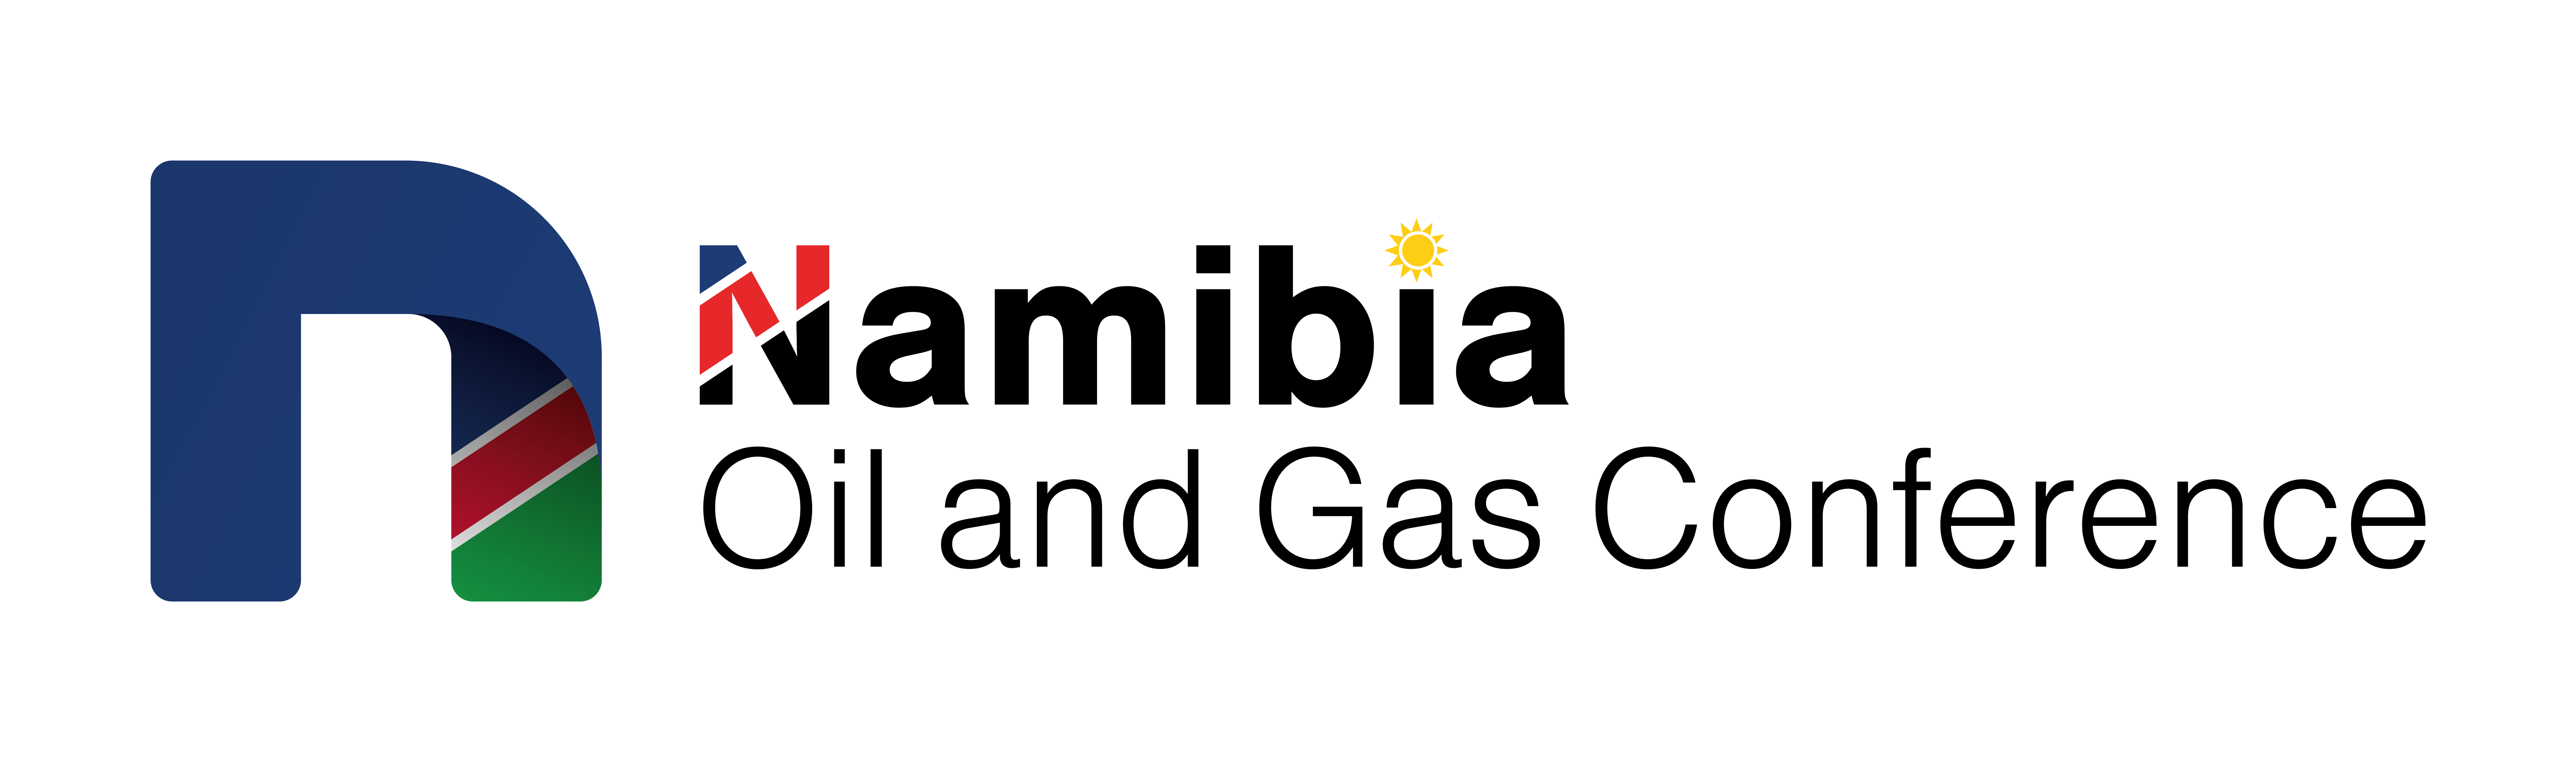 Namibia National Oil and Gas Conference Logo